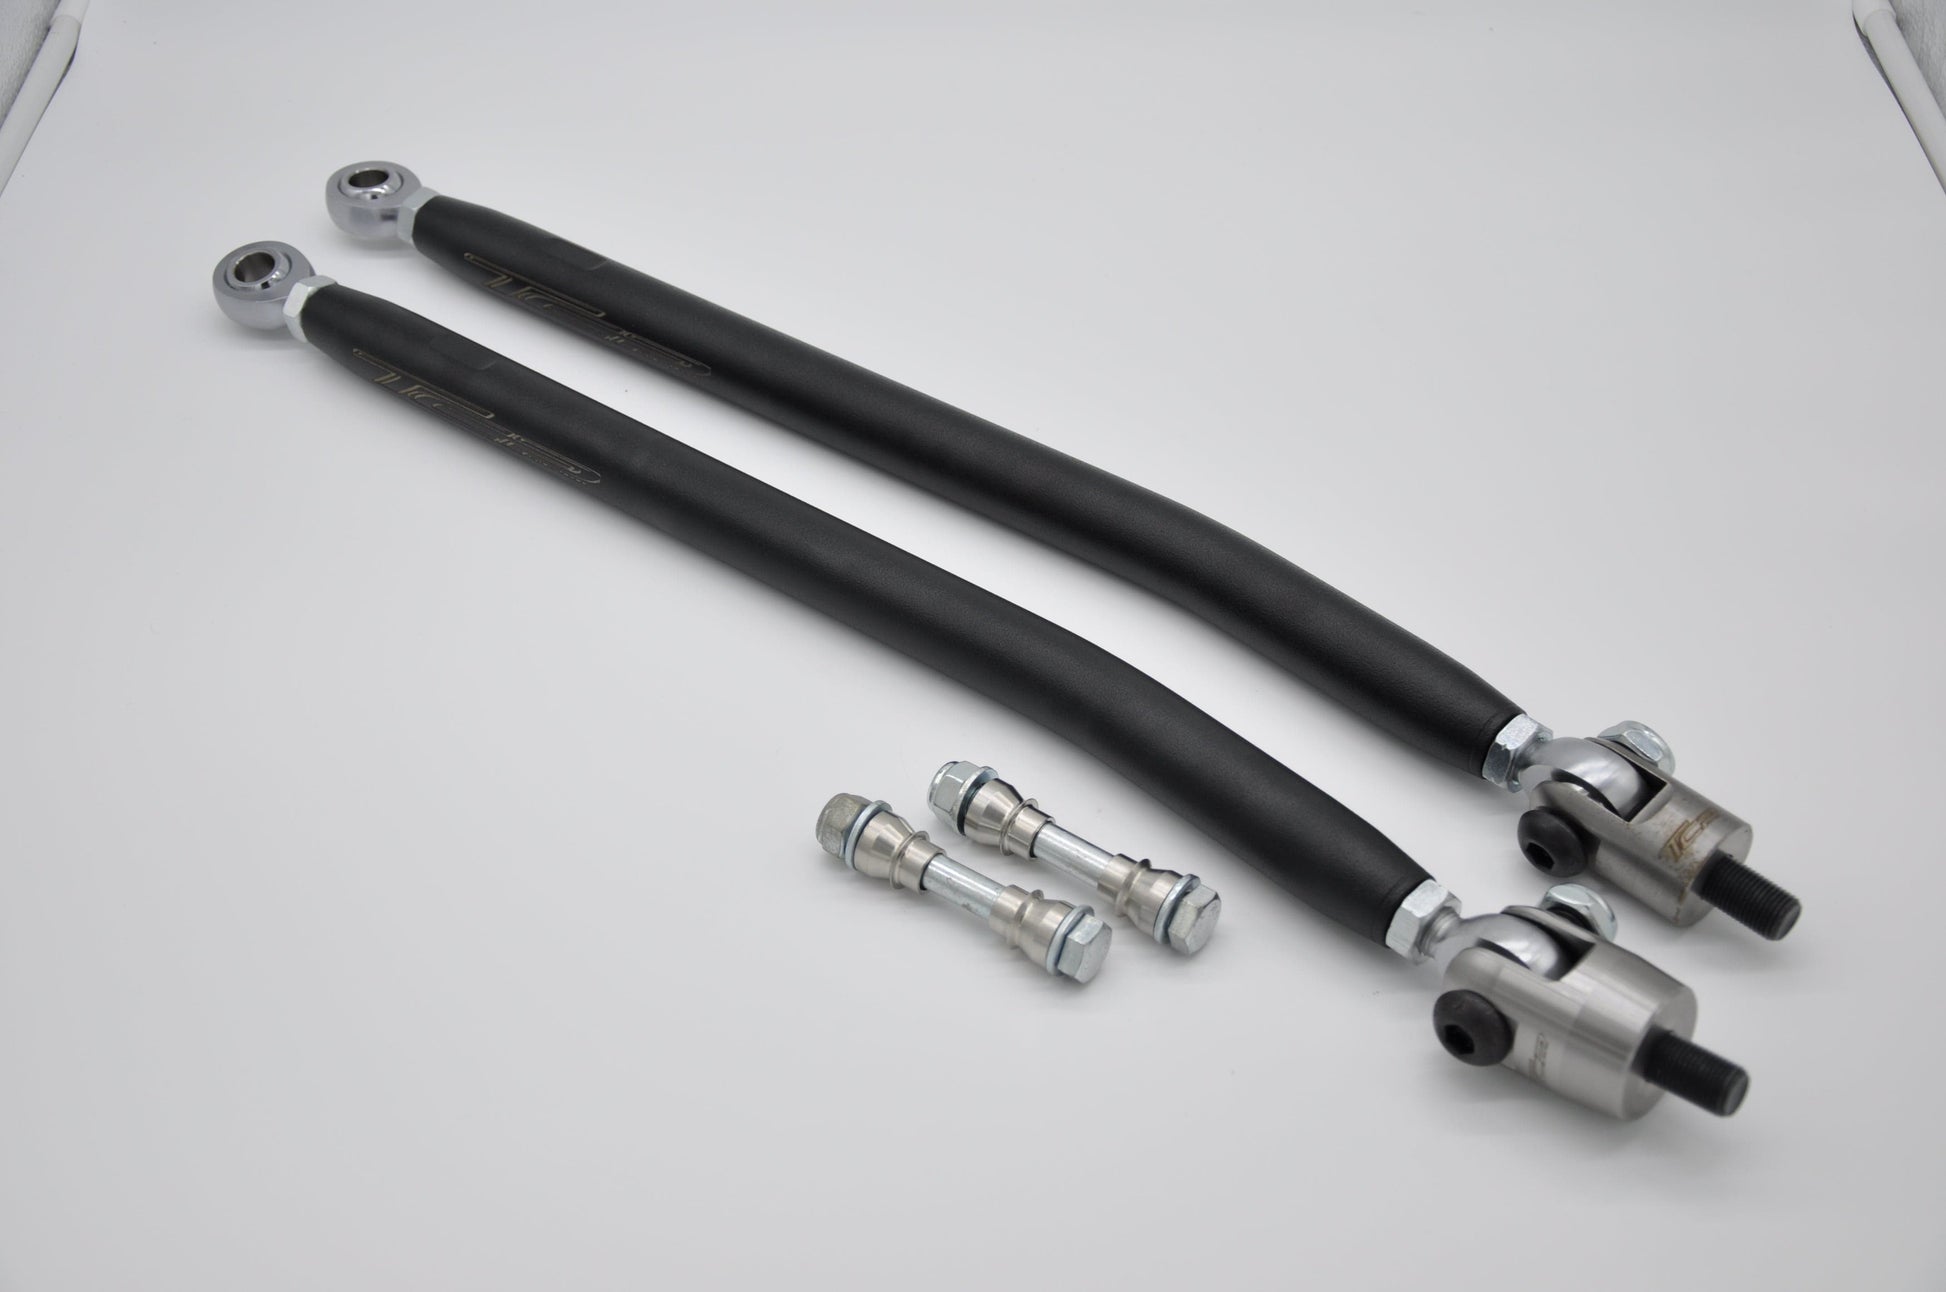 Heavy Duty Tie Rods, Rod Ends, Clevises, and Straight King Pins for Can-Am Maverick X3 72" with SATV 10" Lift